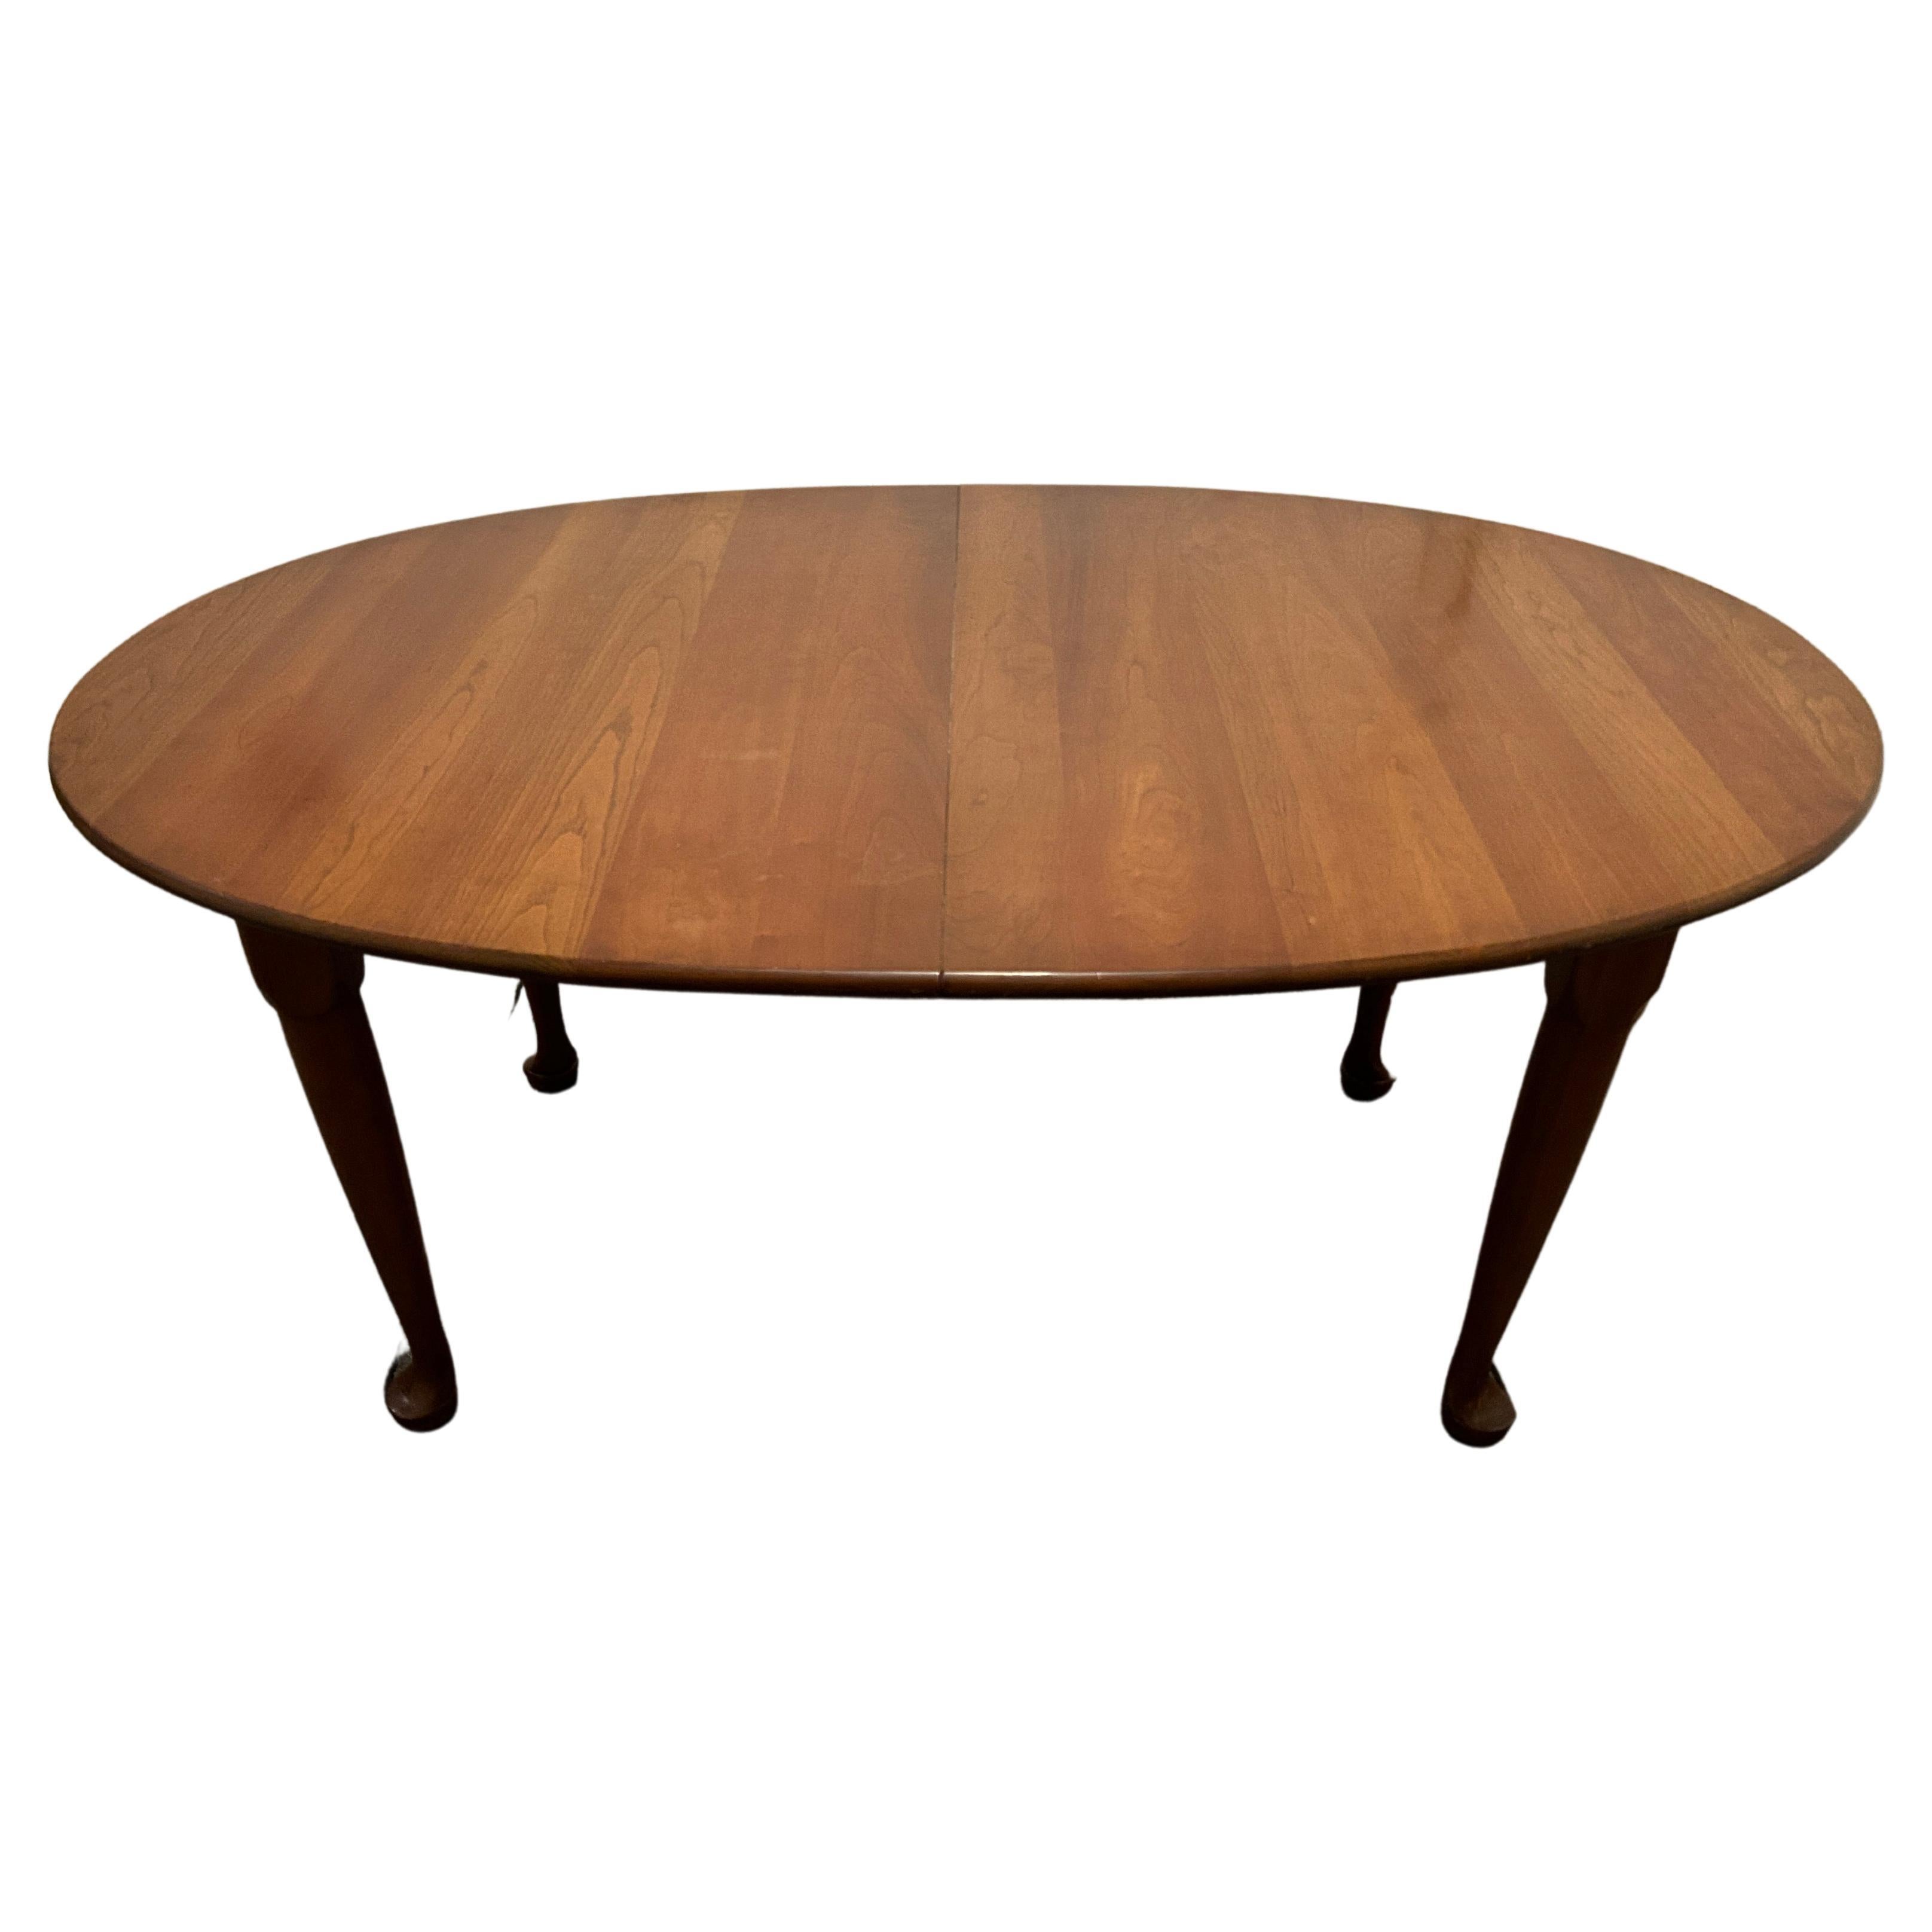 Beautiful Solid cherry dining table with 2 leaves by Stickley. Very good vintage condition - super solid Dining table. Classic oval design with 2x Leaves that match the table. All solid wood with Metal extension glides. Labeled Stickley under